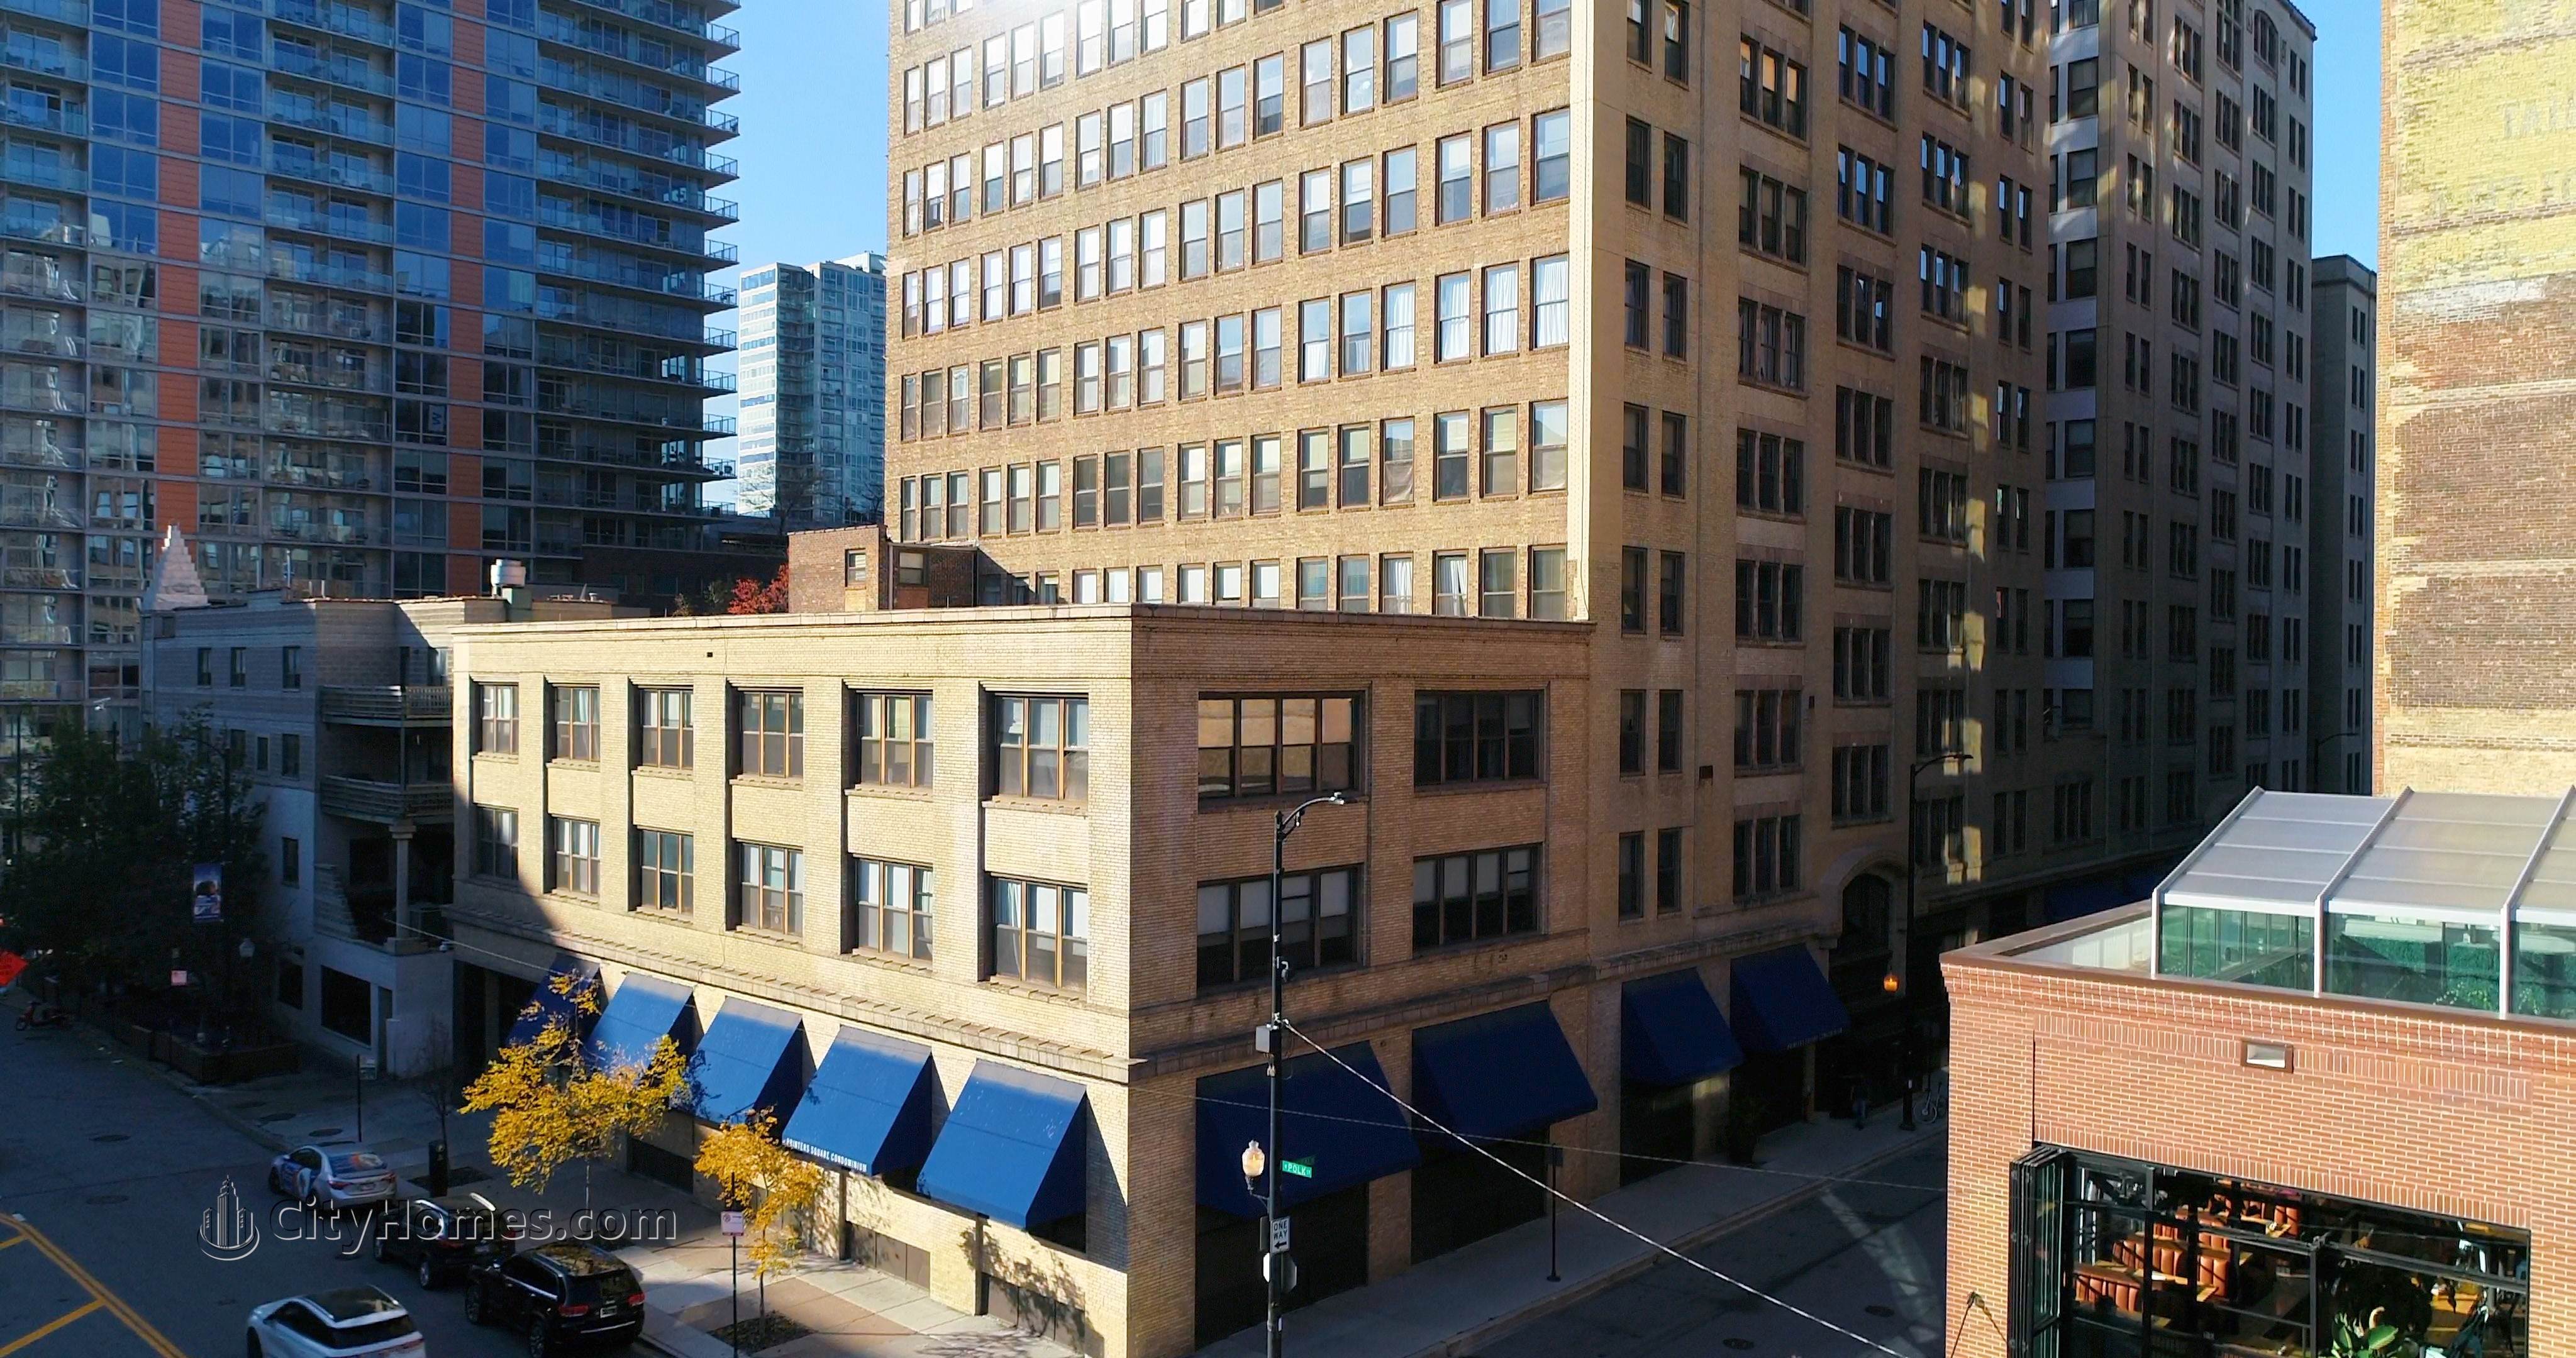 Printers Square κτίριο σε 780-620 S Federal St, Central Chicago, Σικάγο, IL 60605